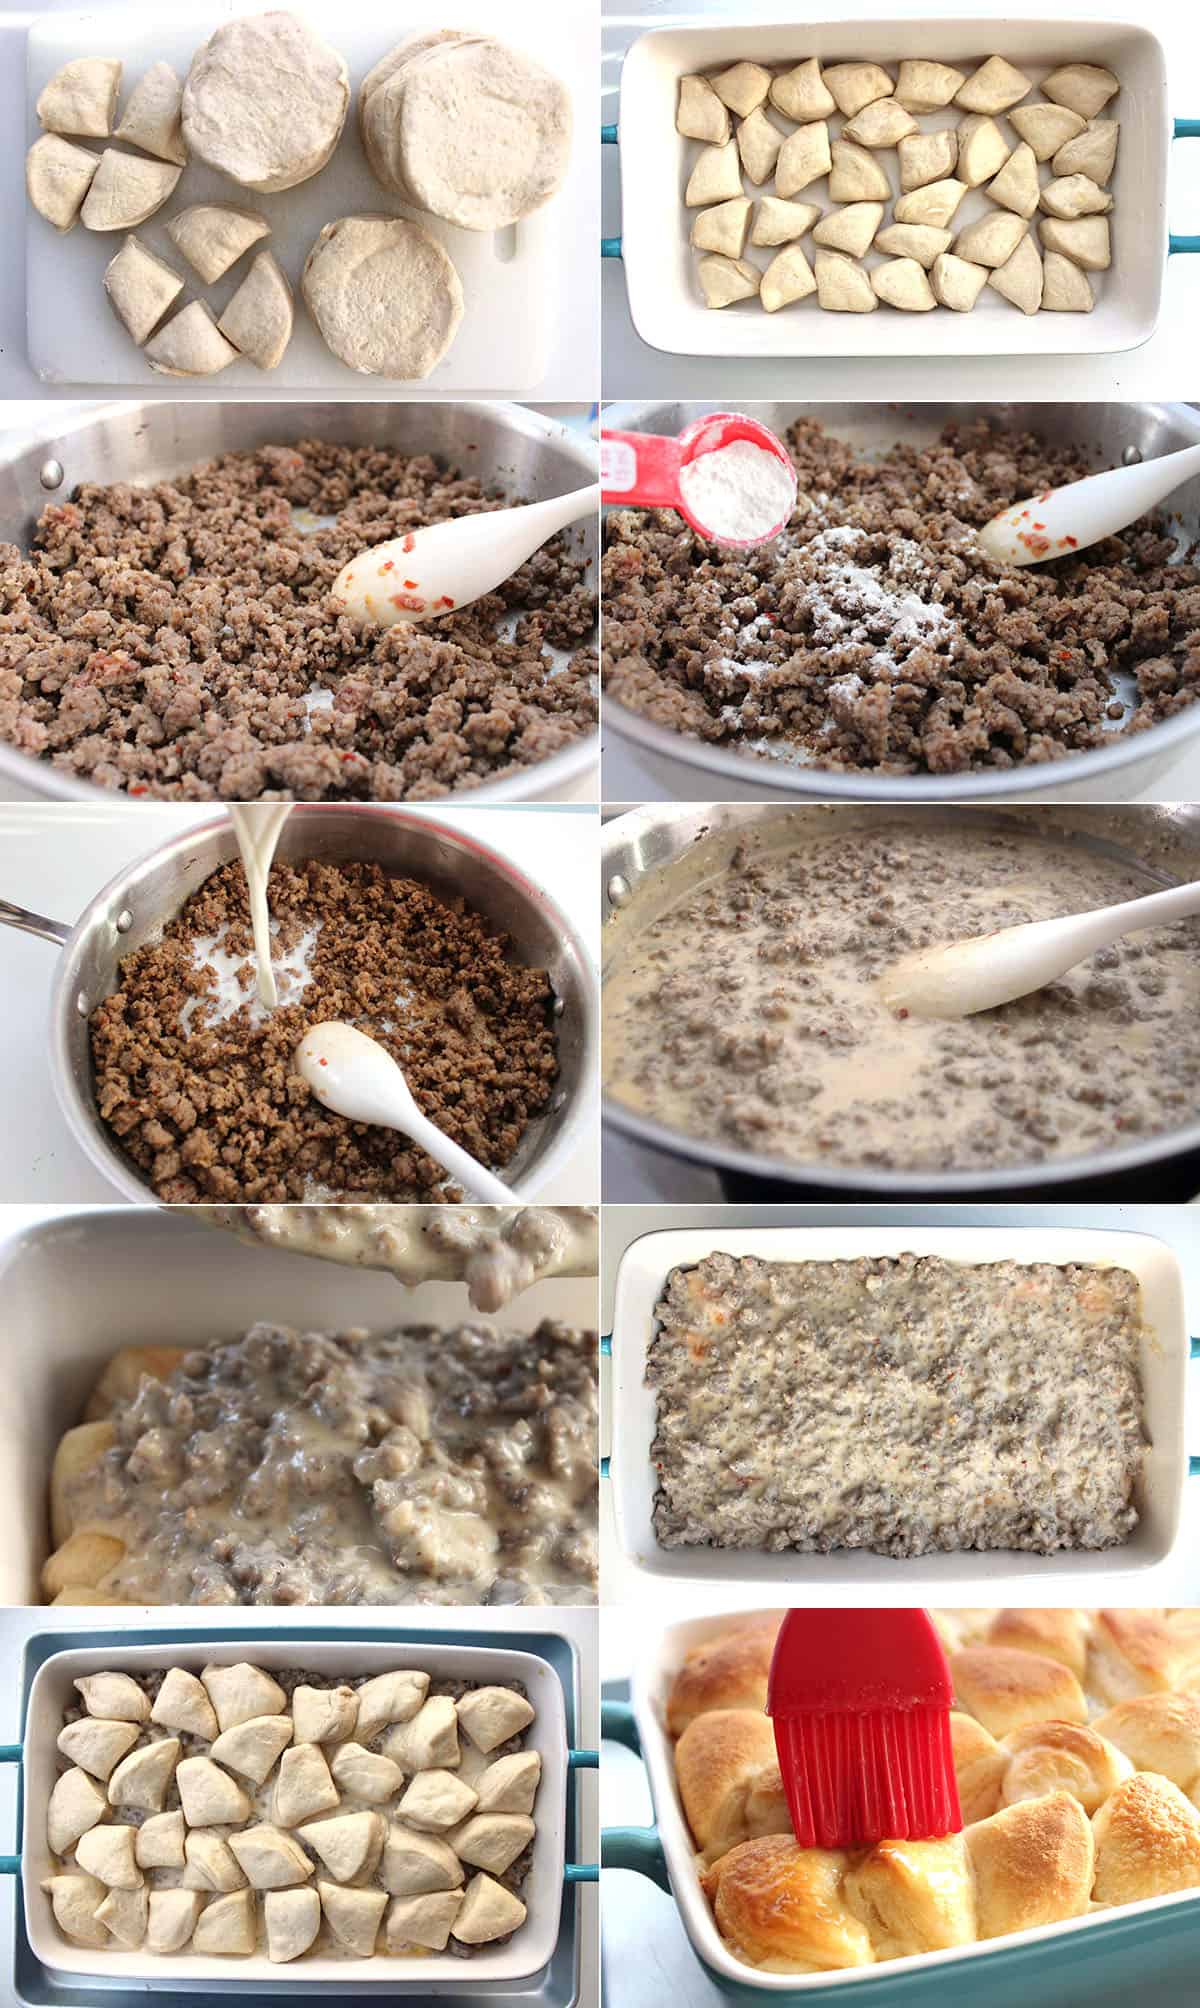 Process to make Sausage Gravy and biscuit casserole.